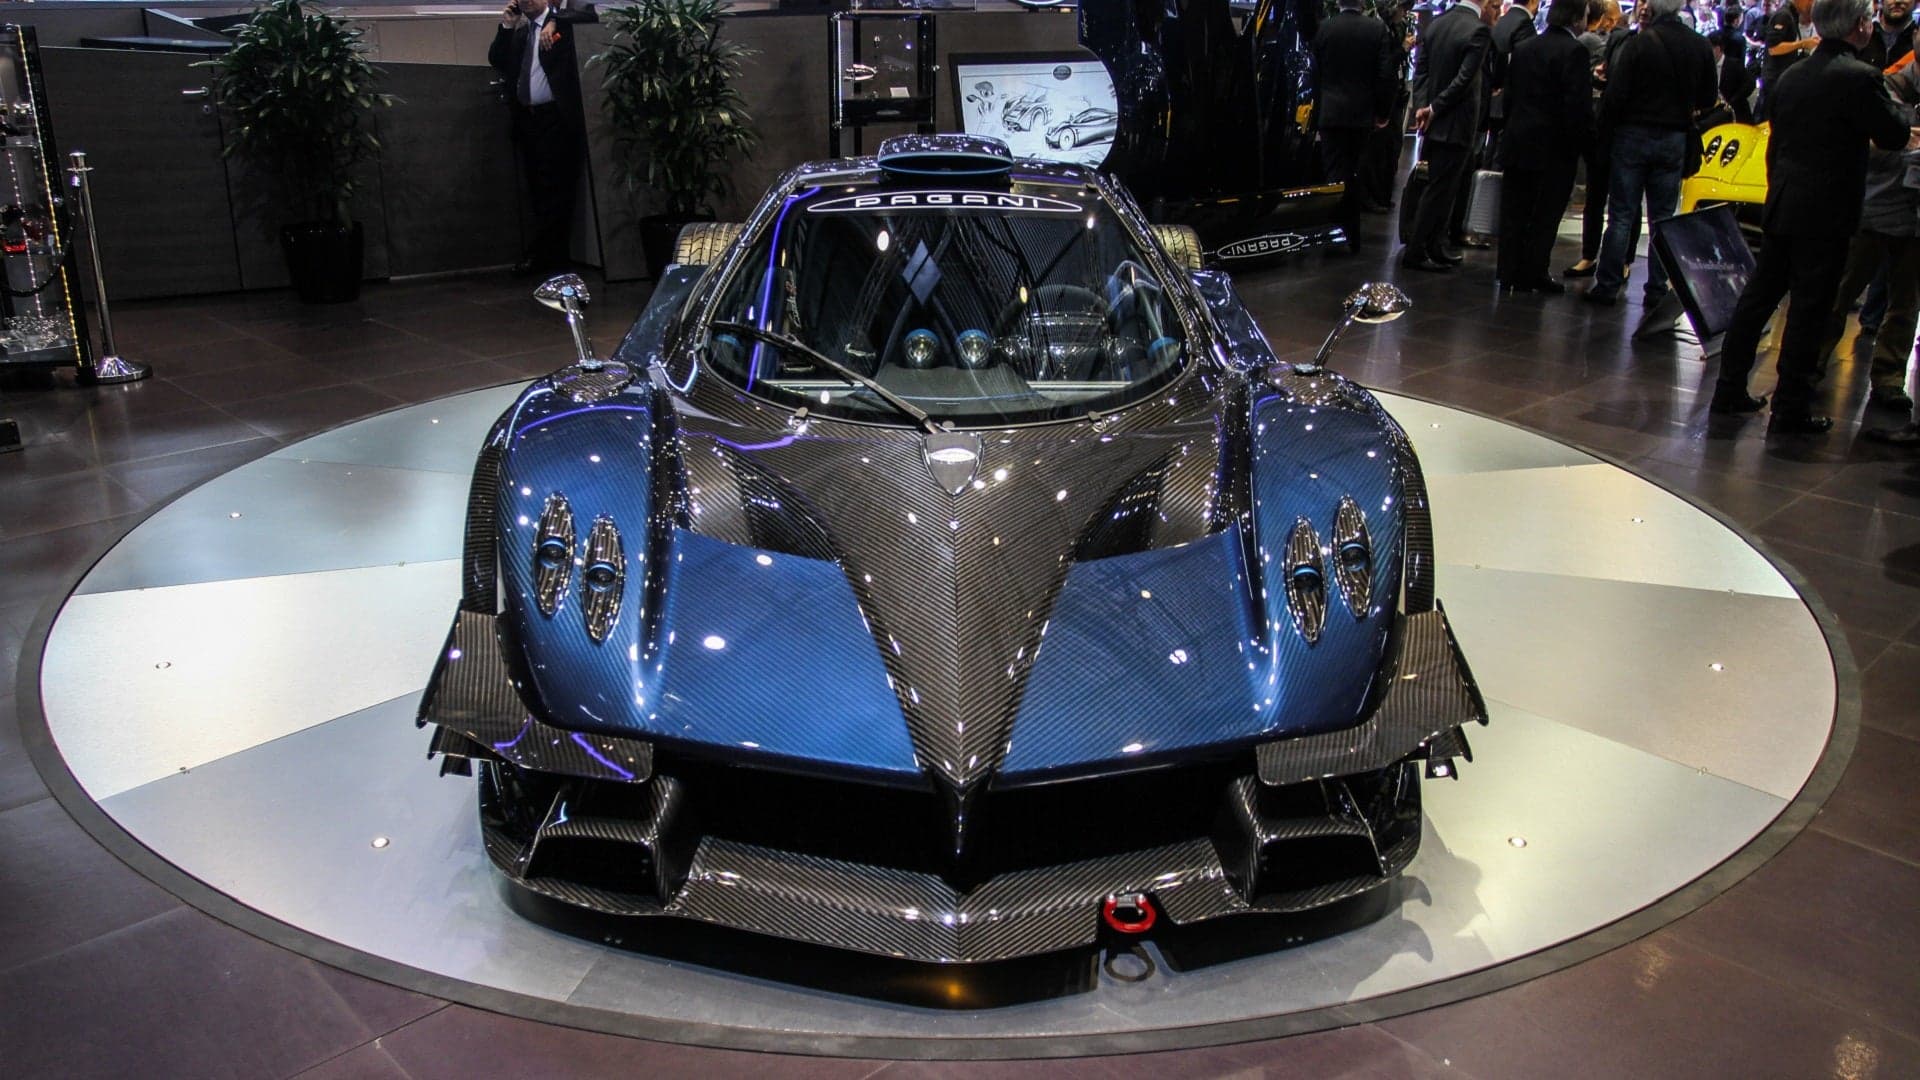 Rare and Expensive Pagani Zonda Is Just Home Decor for Former Racer Pablo Perez